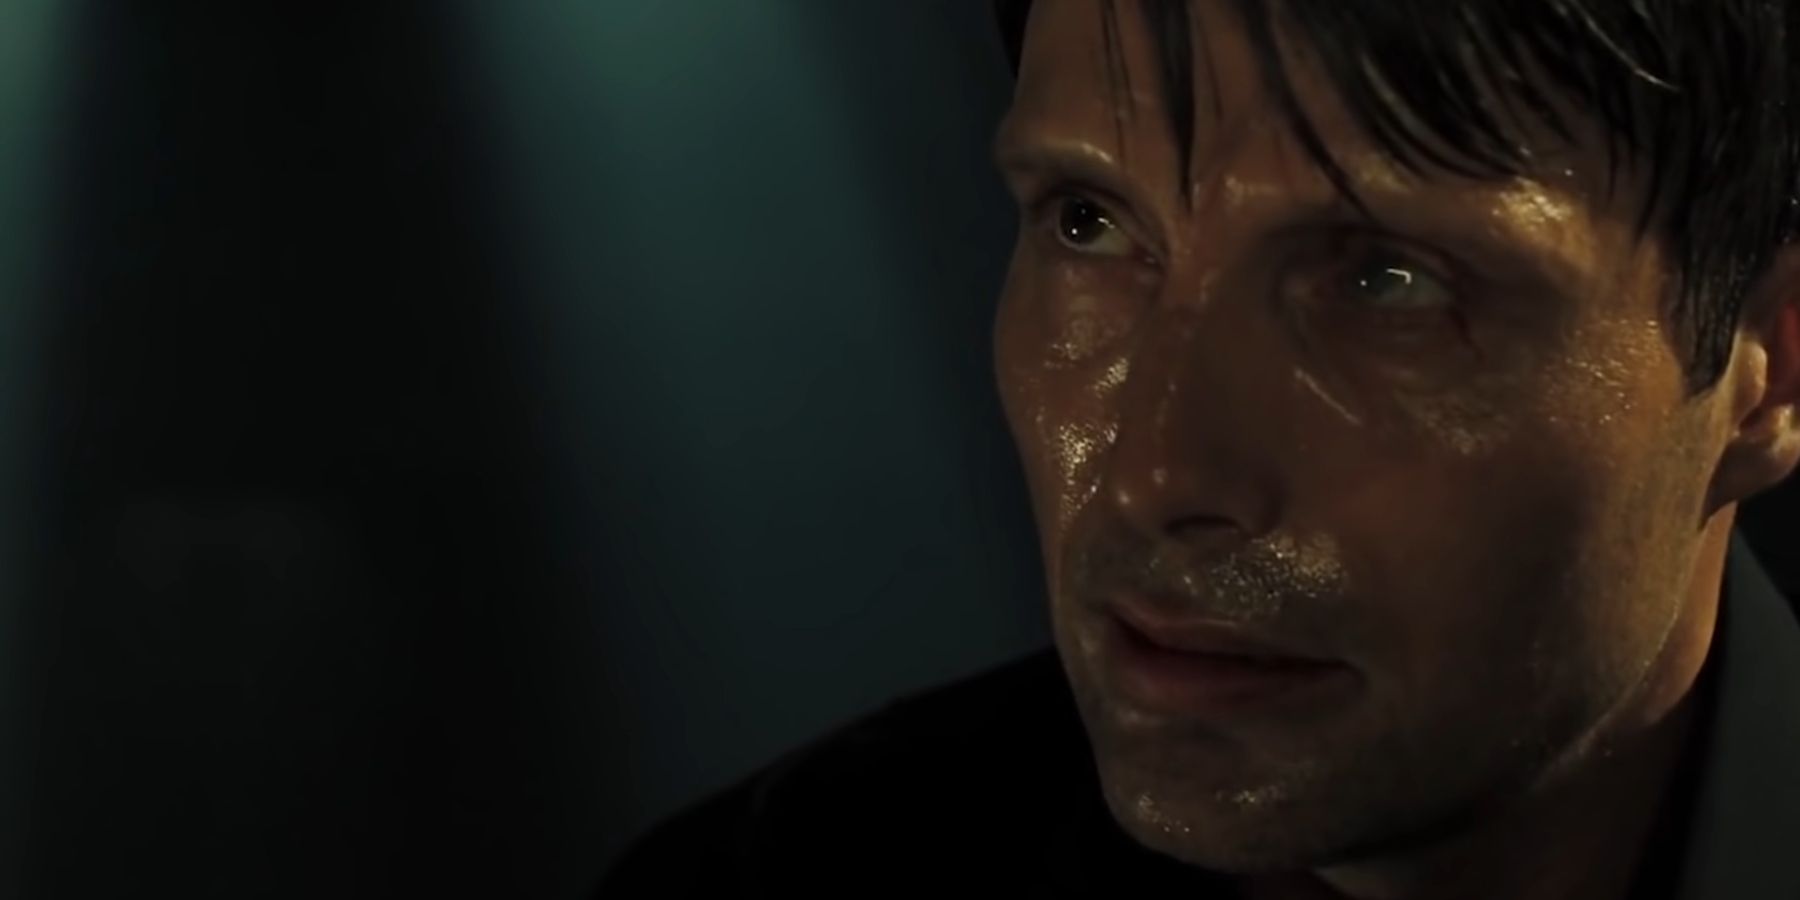 Le Chiffre threatening James Bond in Casino Royale